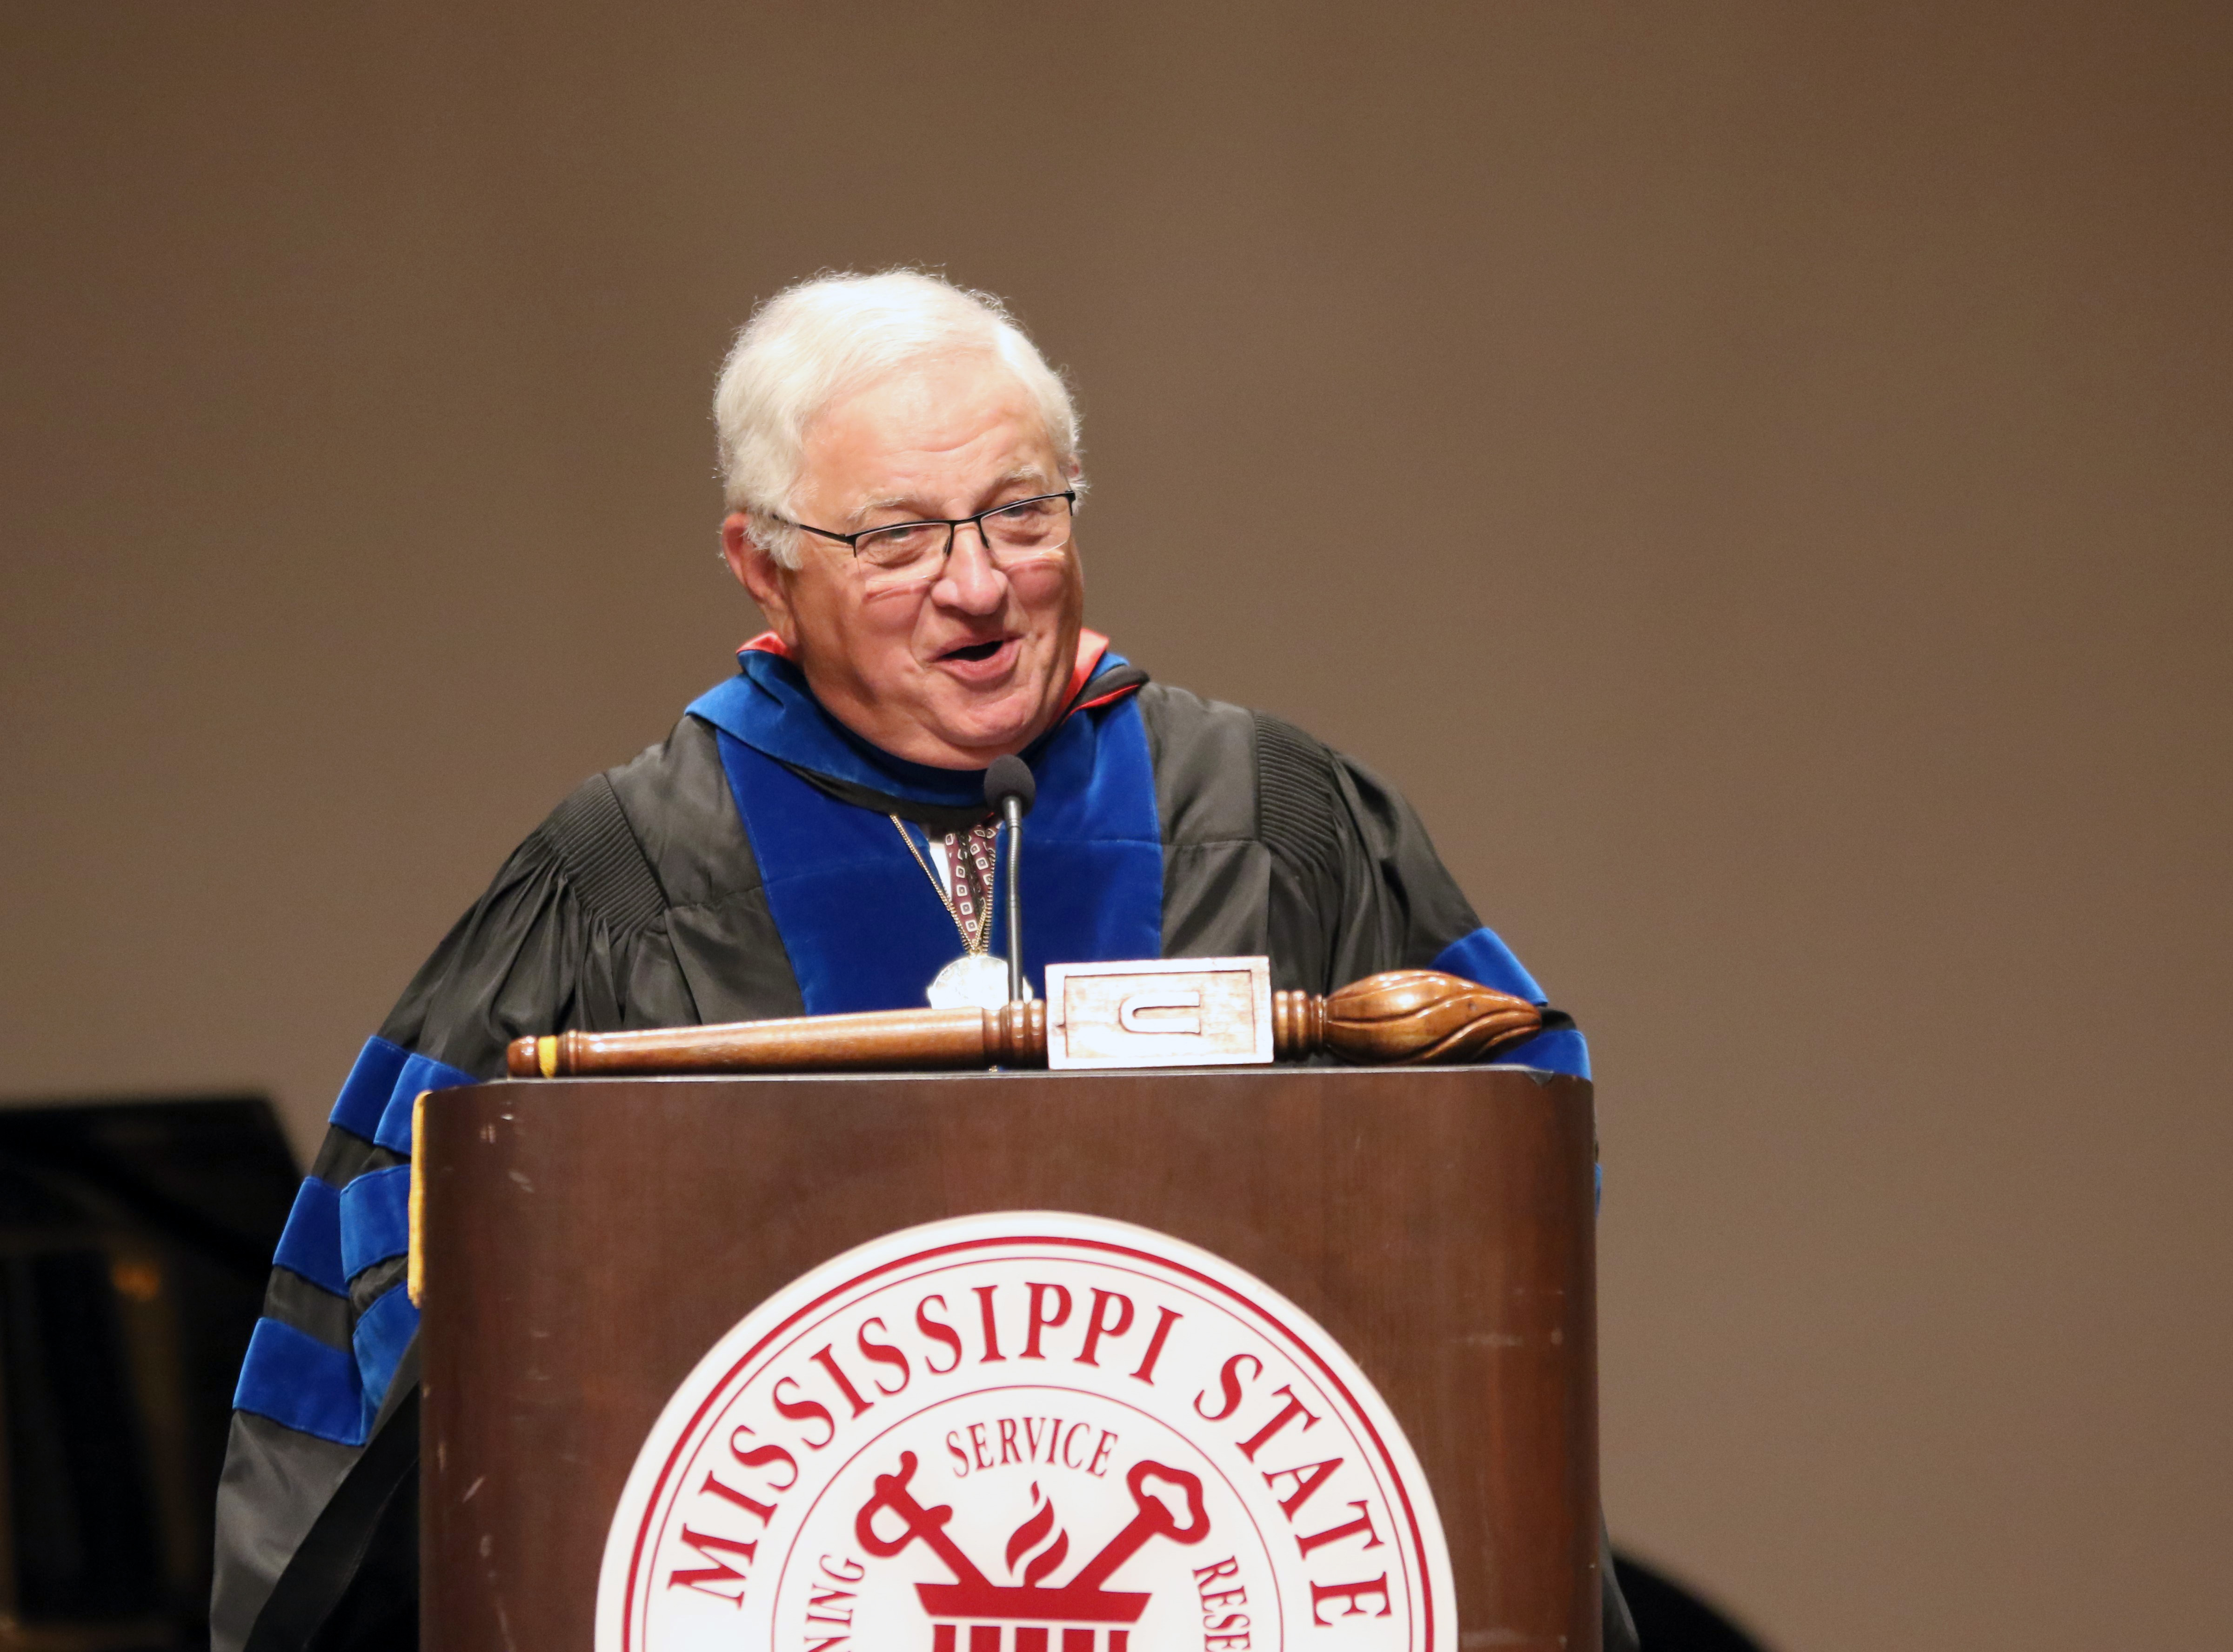 Malcolm Portera, 16th president of Mississippi State University addresses the overflow crowd at MSU-Meridian’s 2019 spring commencement ceremonies held at the MSU Riley Center in downtown Meridian. (Photo by Jason Dyess)